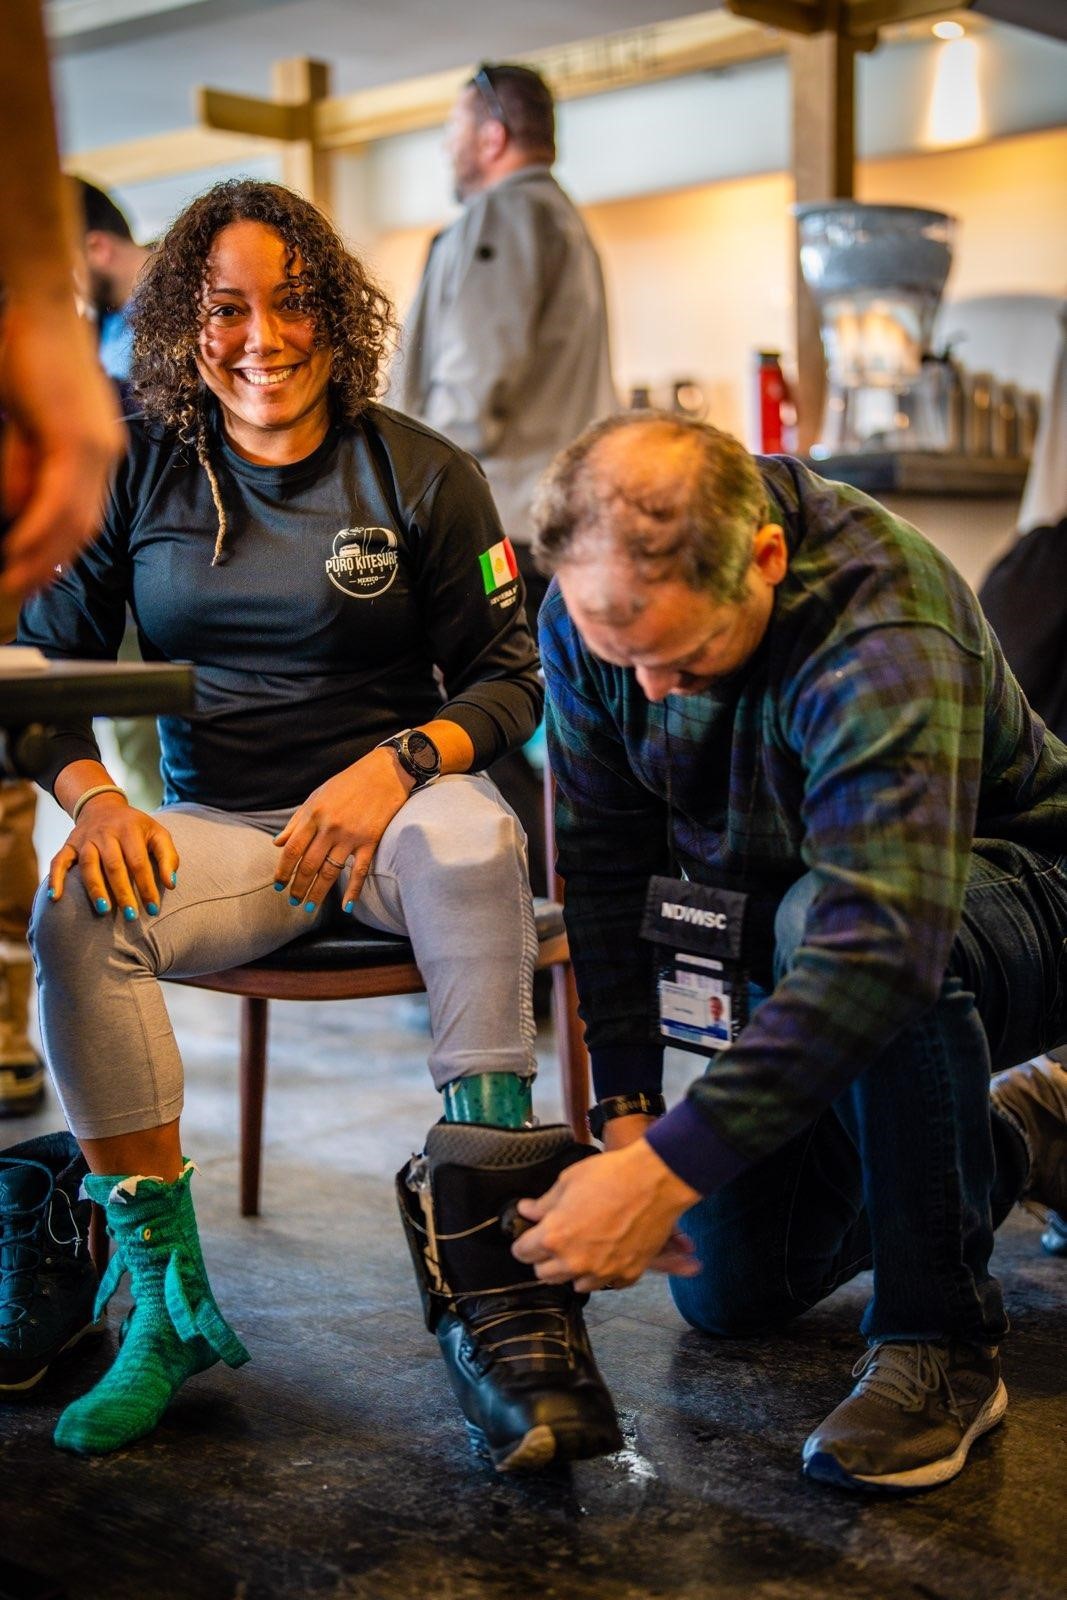 Frances Osorio-Rivera, US Army 2009-2013 gets fitted snowboard boot